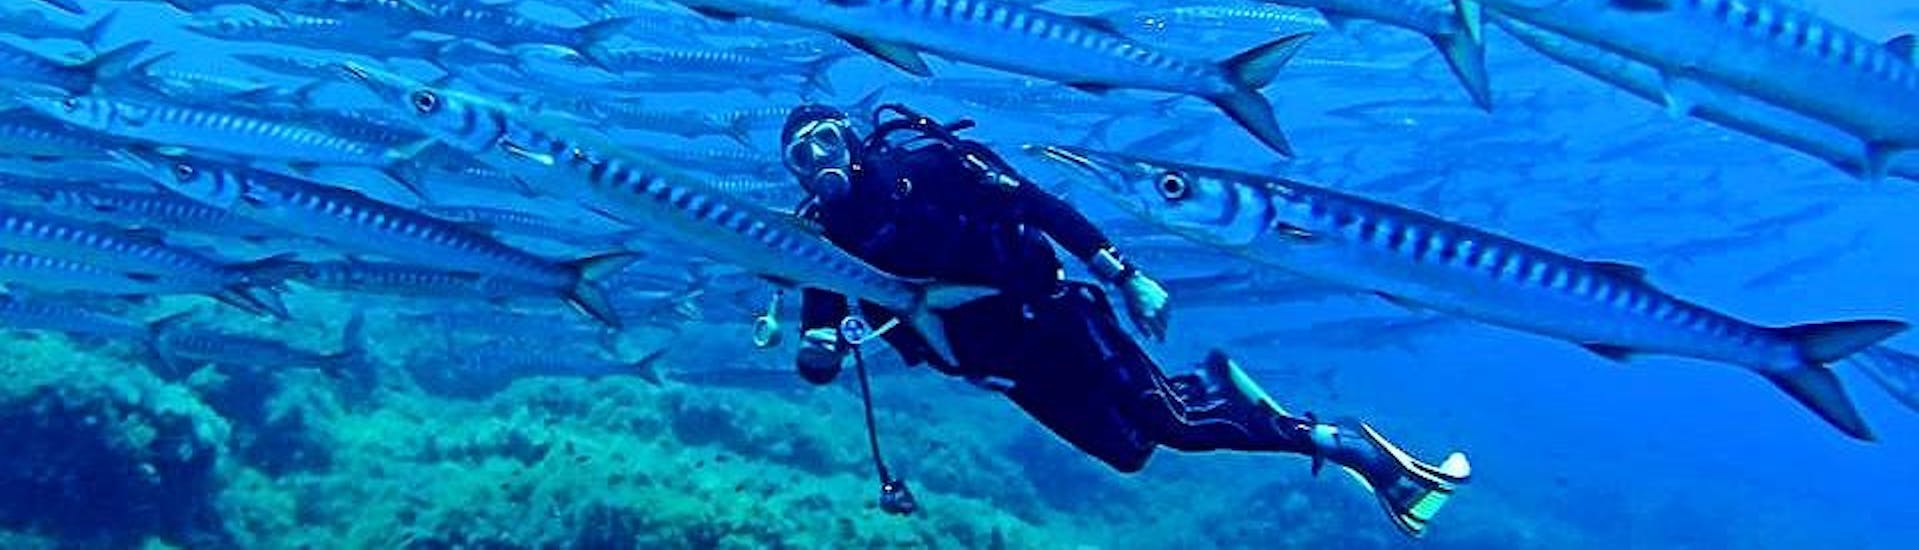 scuba-diving-in-ustica-for-certified-divers-lustrica-diving-center-hero